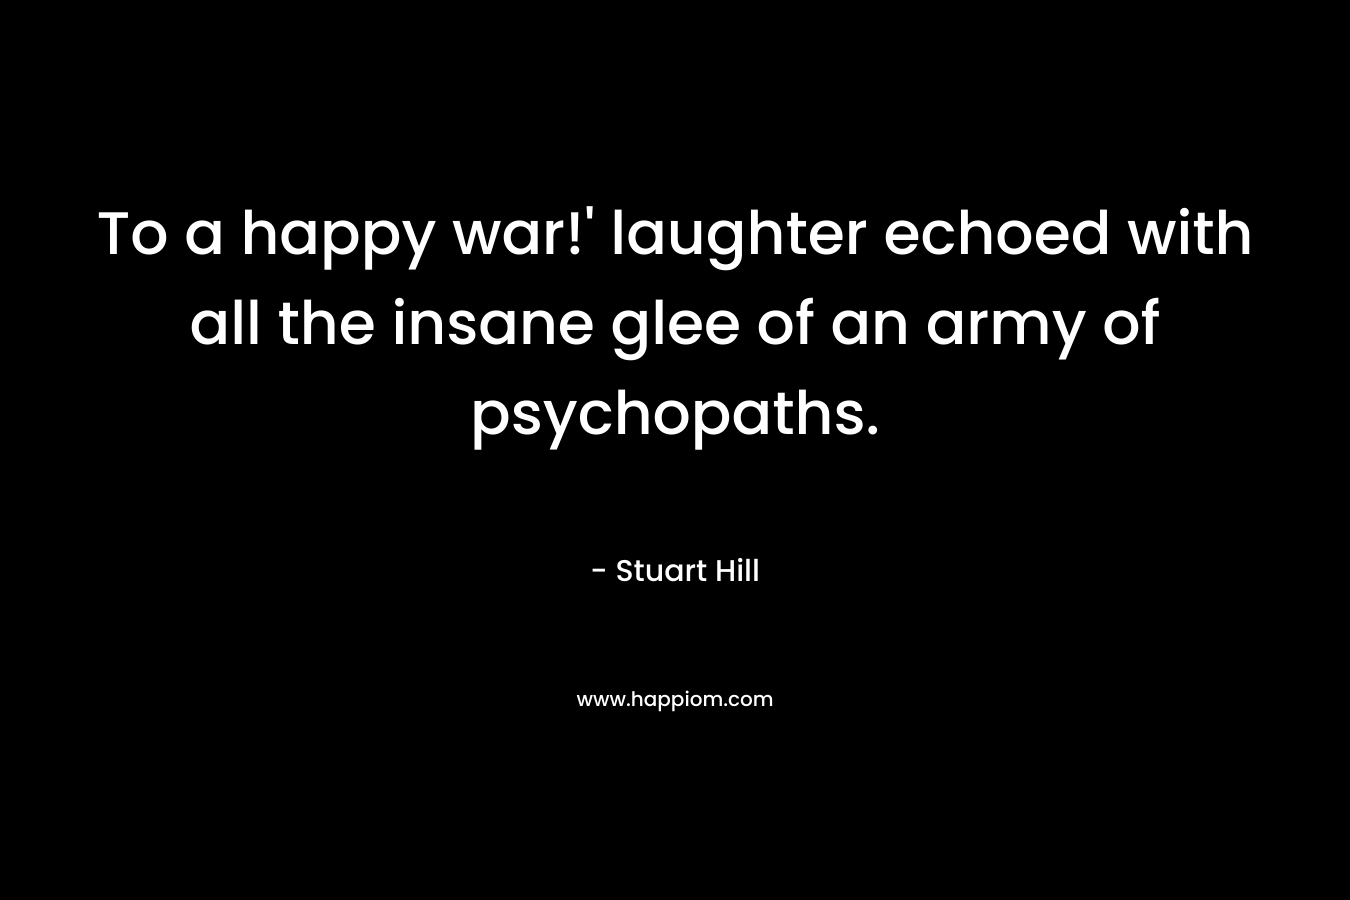 To a happy war!’ laughter echoed with all the insane glee of an army of psychopaths. – Stuart Hill